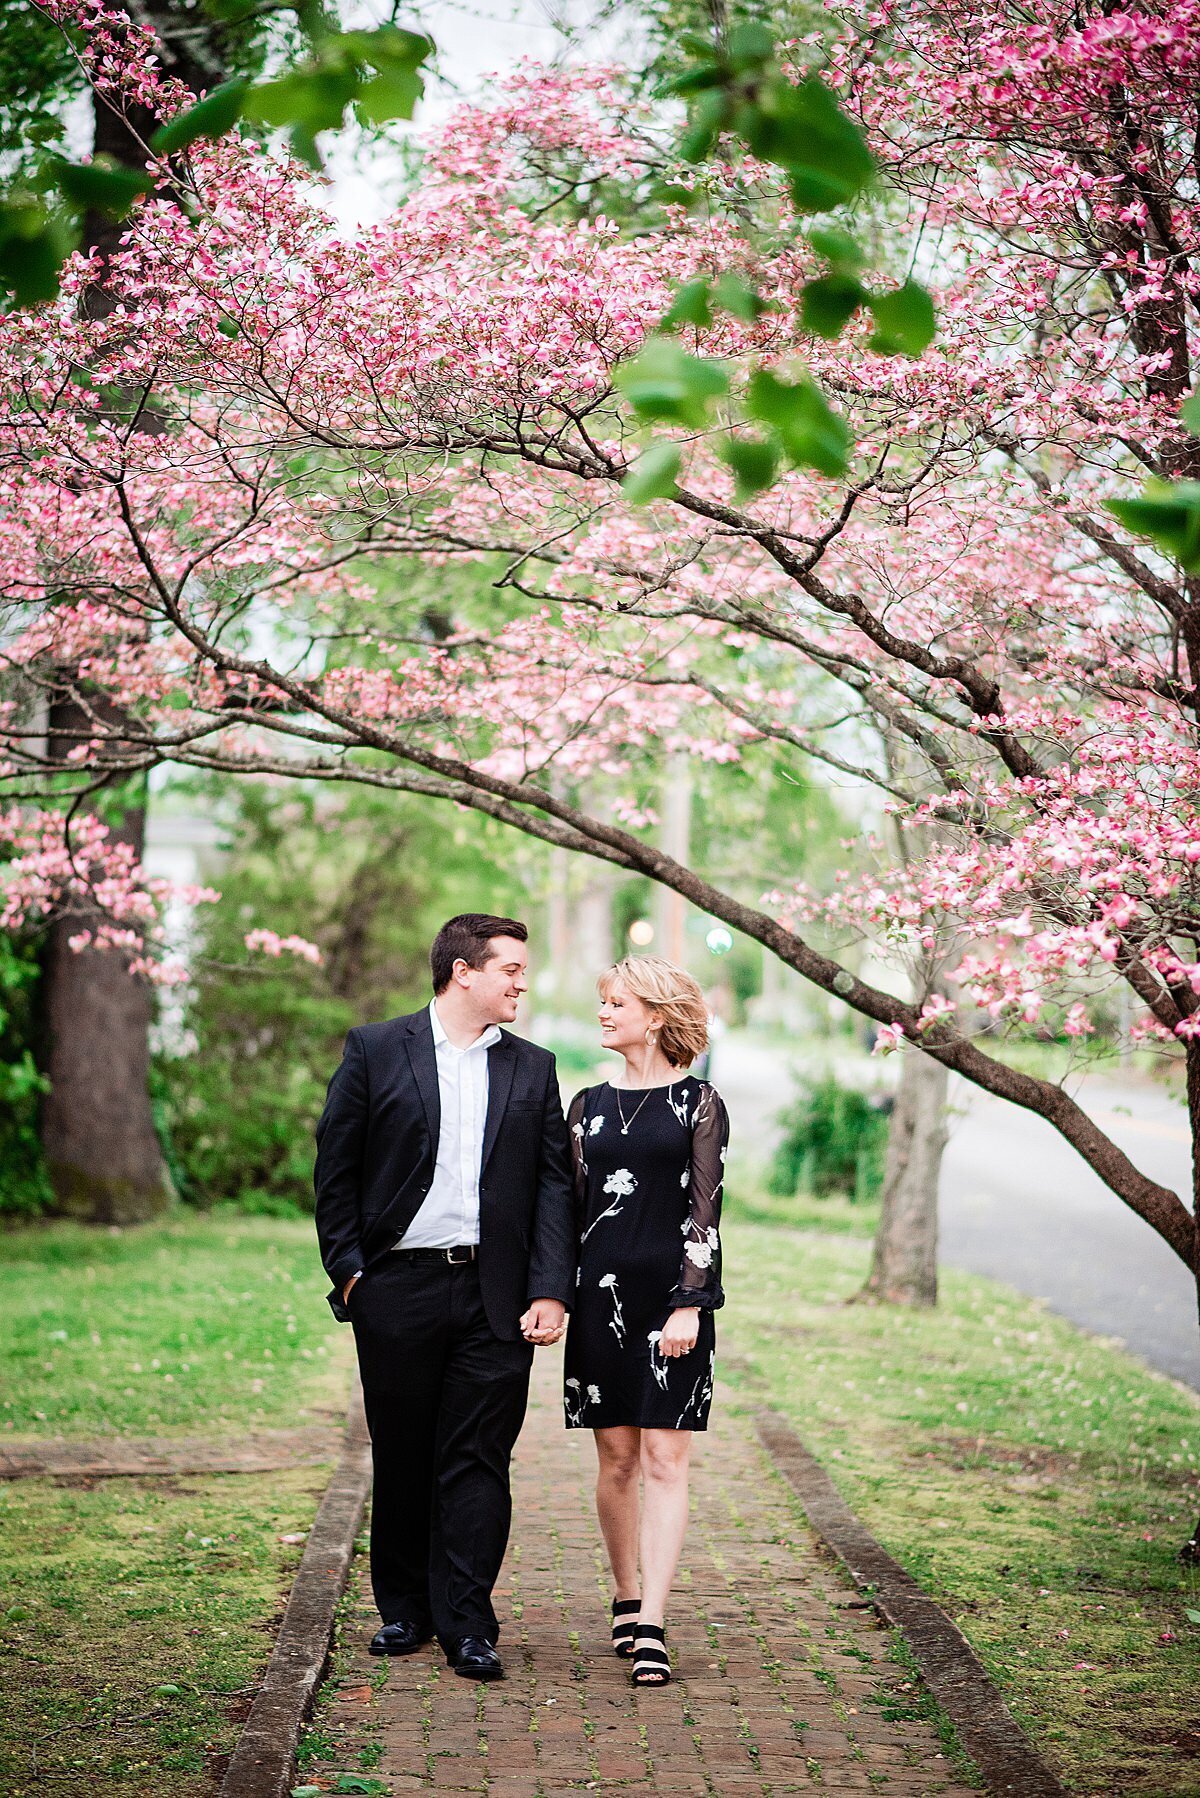 The bride and groom walk beneath  the pink cherry trees on a garden bath holding hands. The groom is wearing a black suit with a white shirt, his hand in is pocket. The bride is wearing a knee length long sleeved black dress with a white and pink floral pattern with strappy sandals.